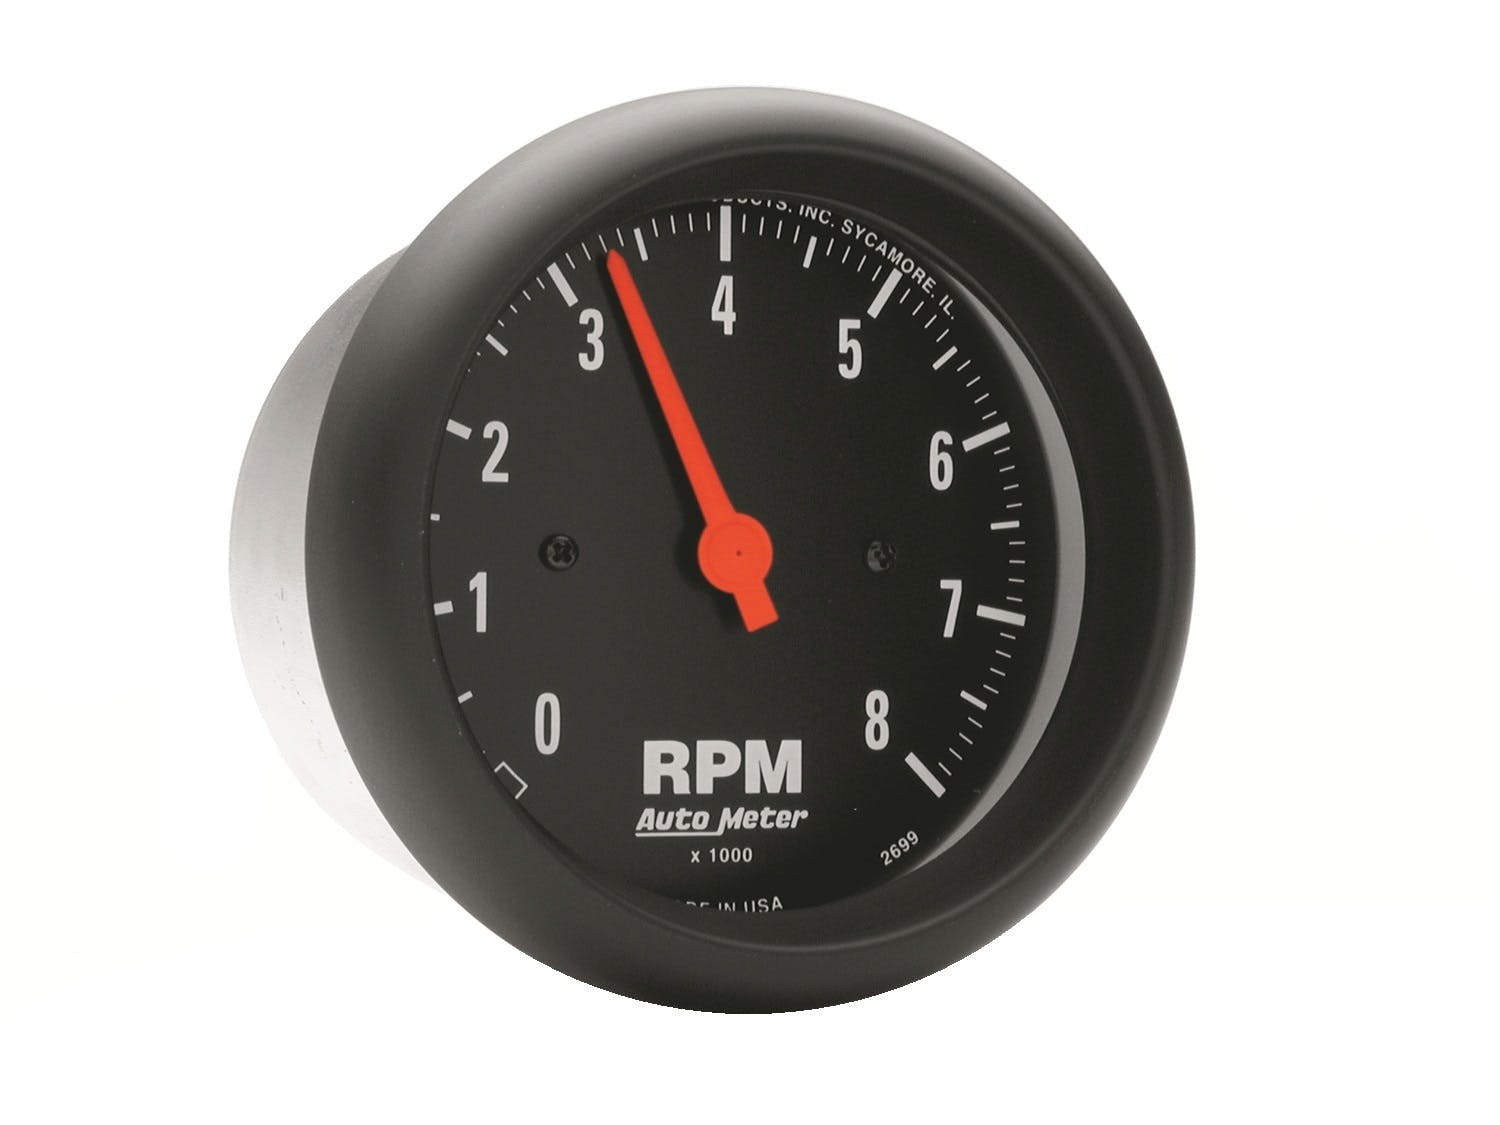 AutoMeter Products 2698 Tach 8000 Rpm